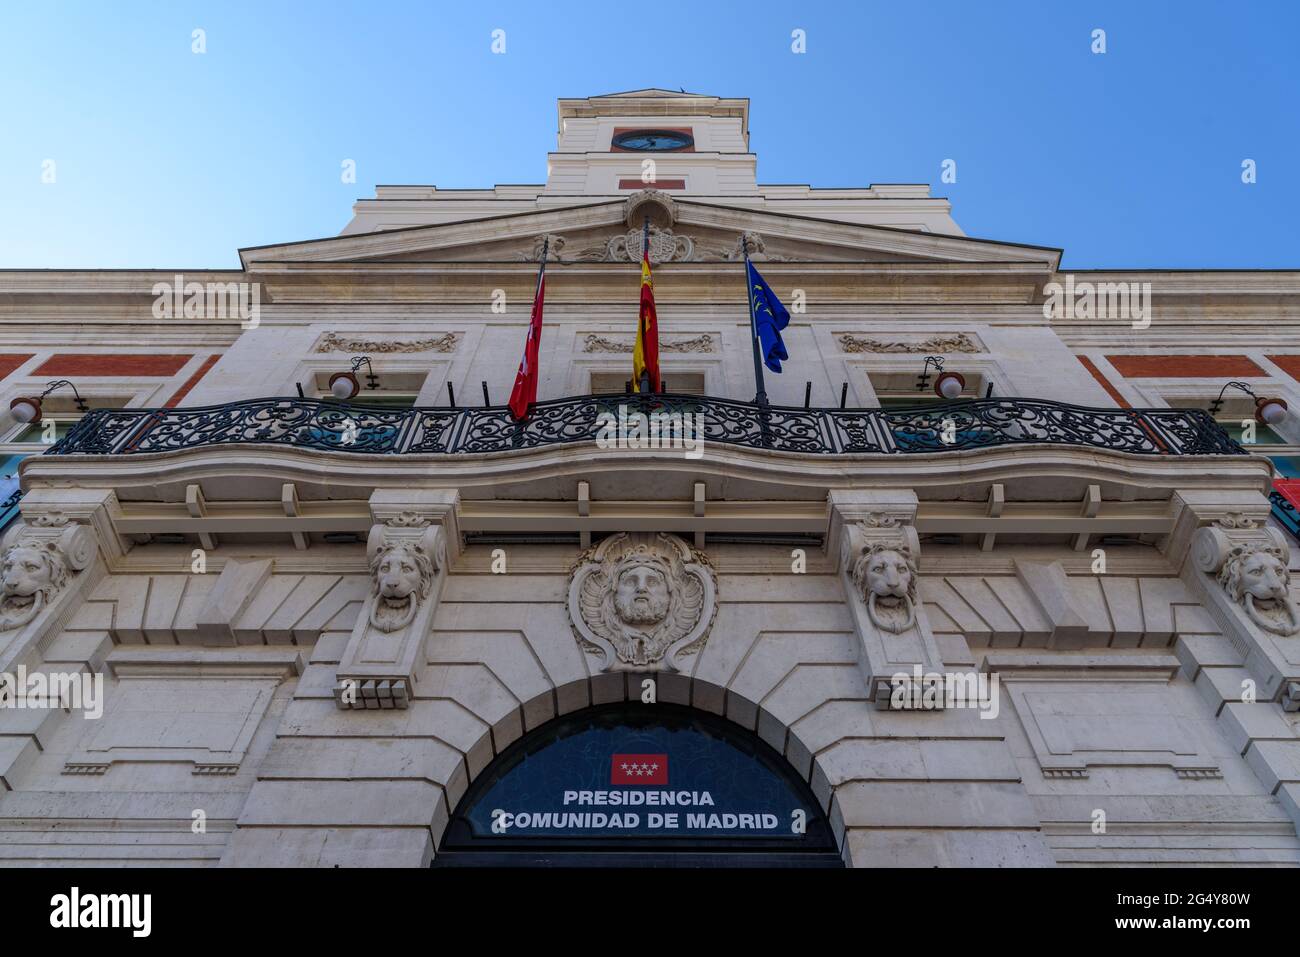 Madrid, Spain - April, 18 2021: Real Casa de Correo or The Royal House of the Post Office Is the Office of the President of the Community of Madrid, t Stock Photo